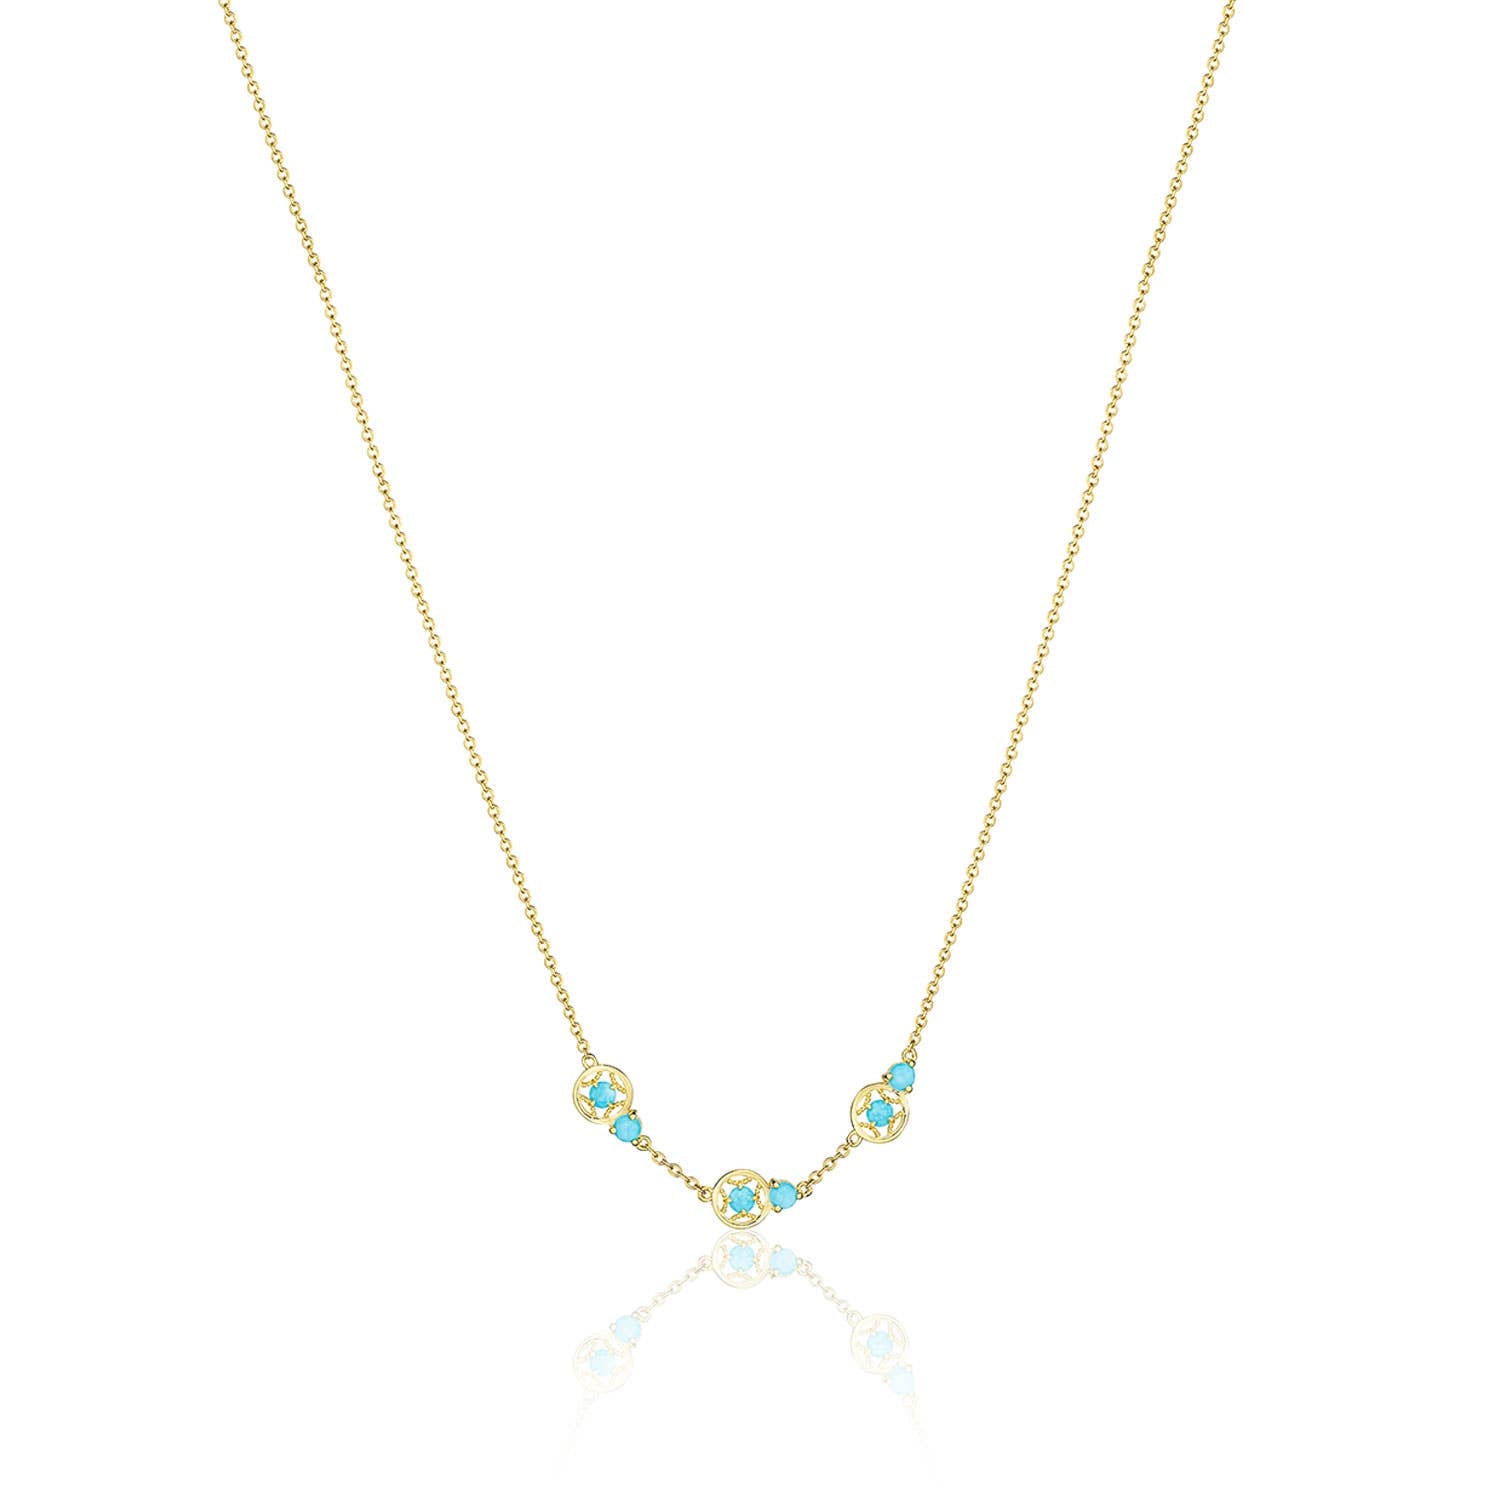 Petite Gemstone Necklace with Turquoise